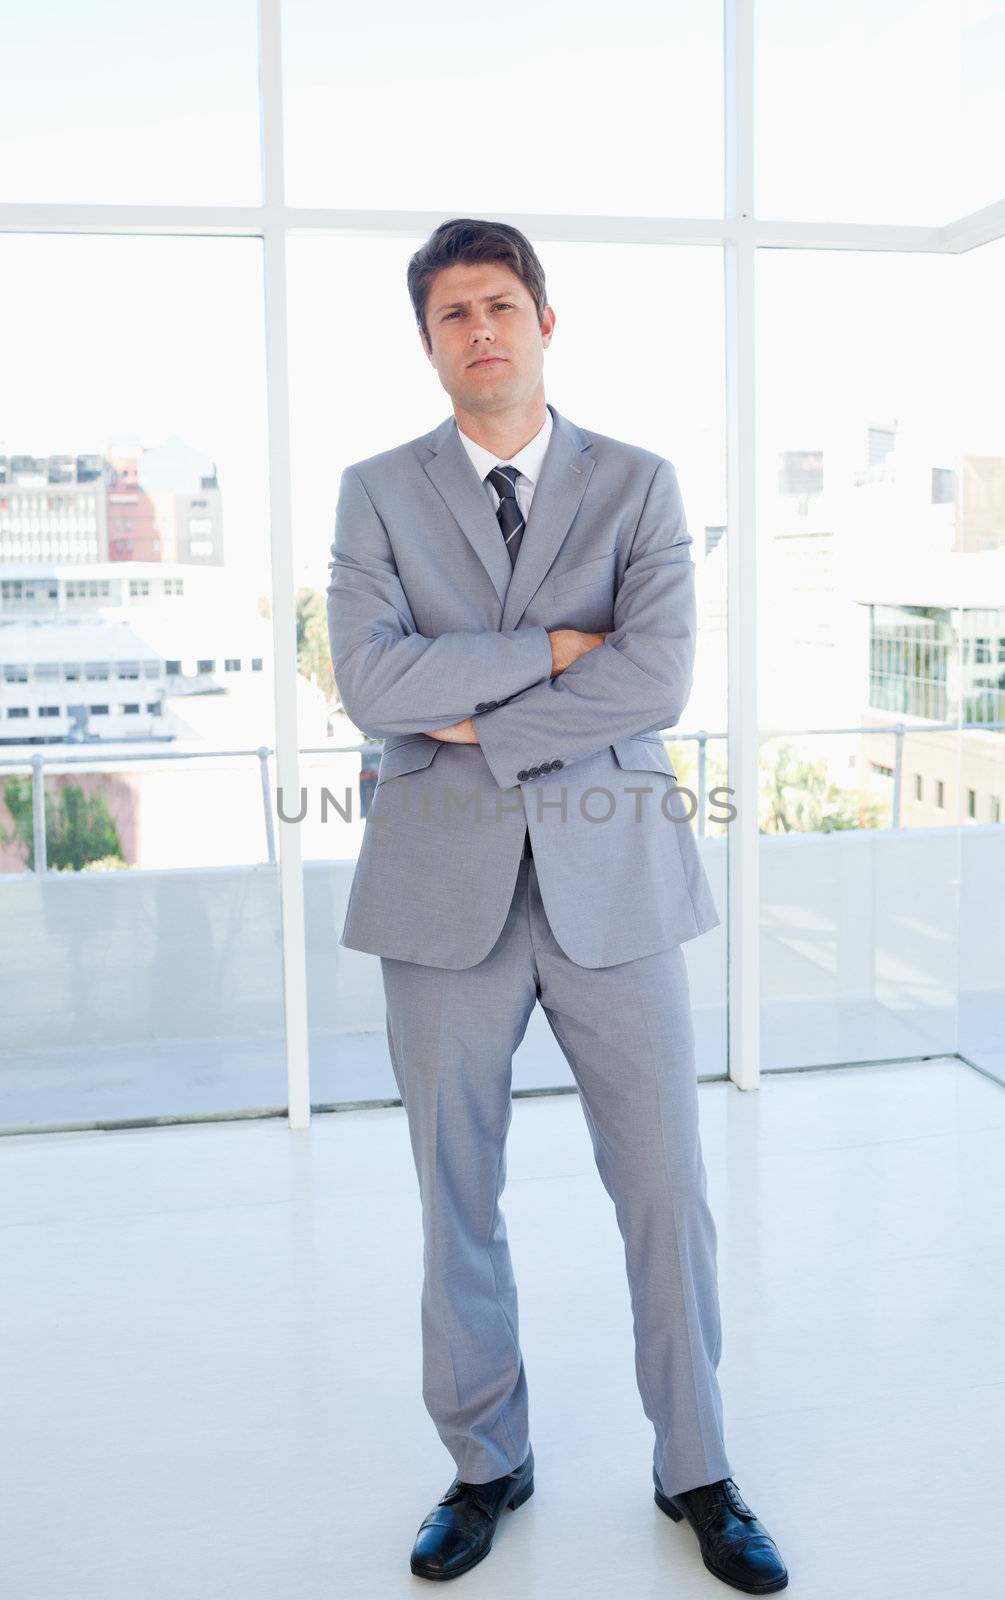 Businessman crossing his arms and standing upright in front of a bright window